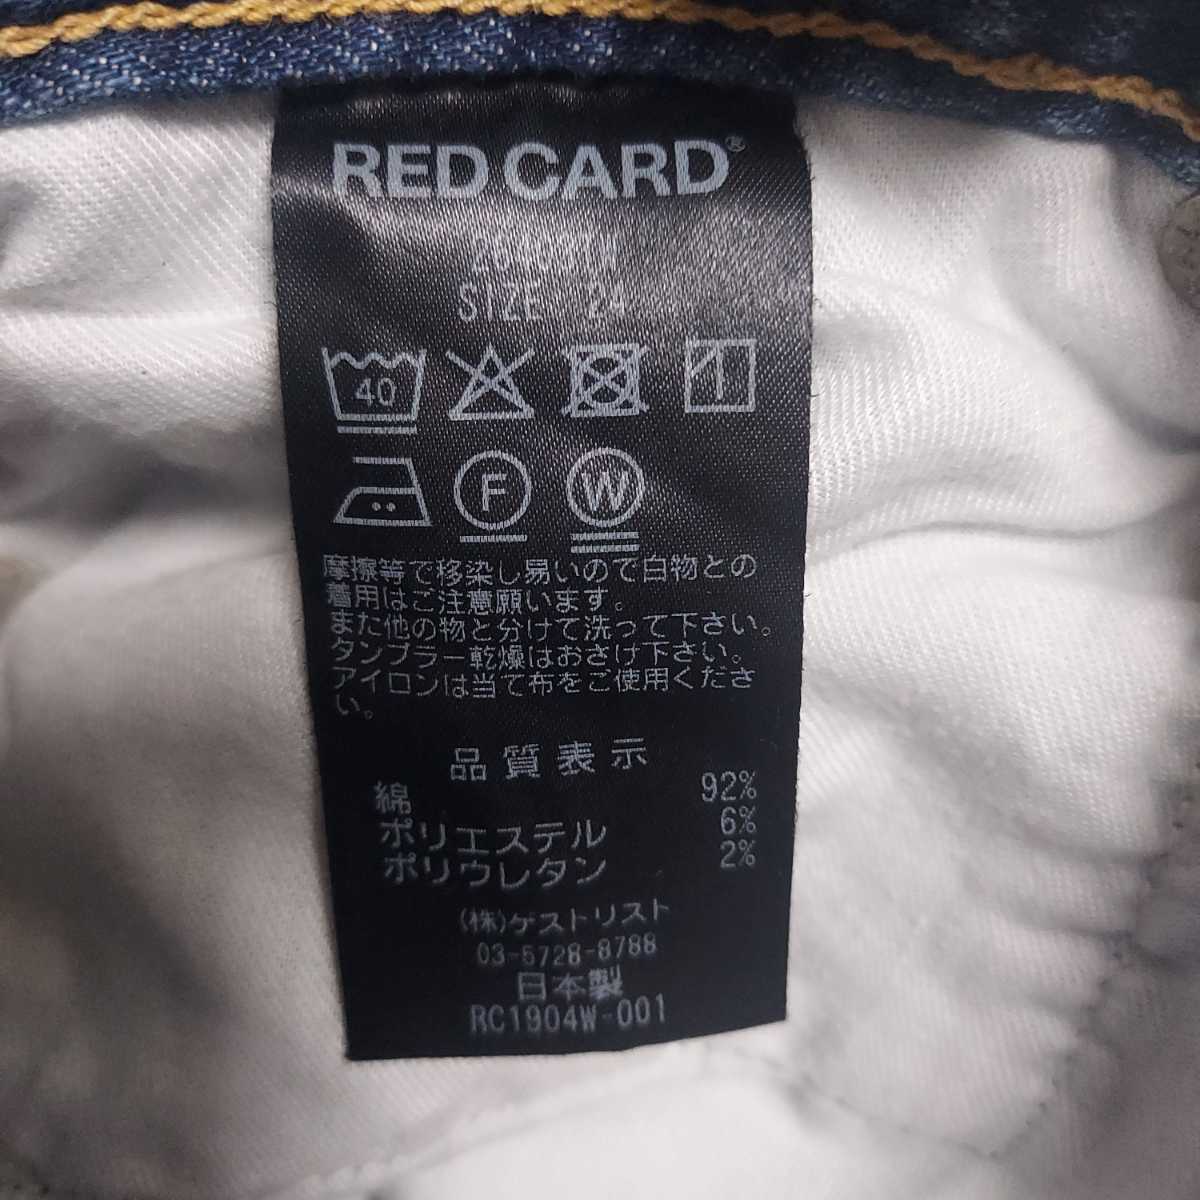 RED CARD red card Anniversary cut off tapered Denim pants /24 26403TW made in Japan 